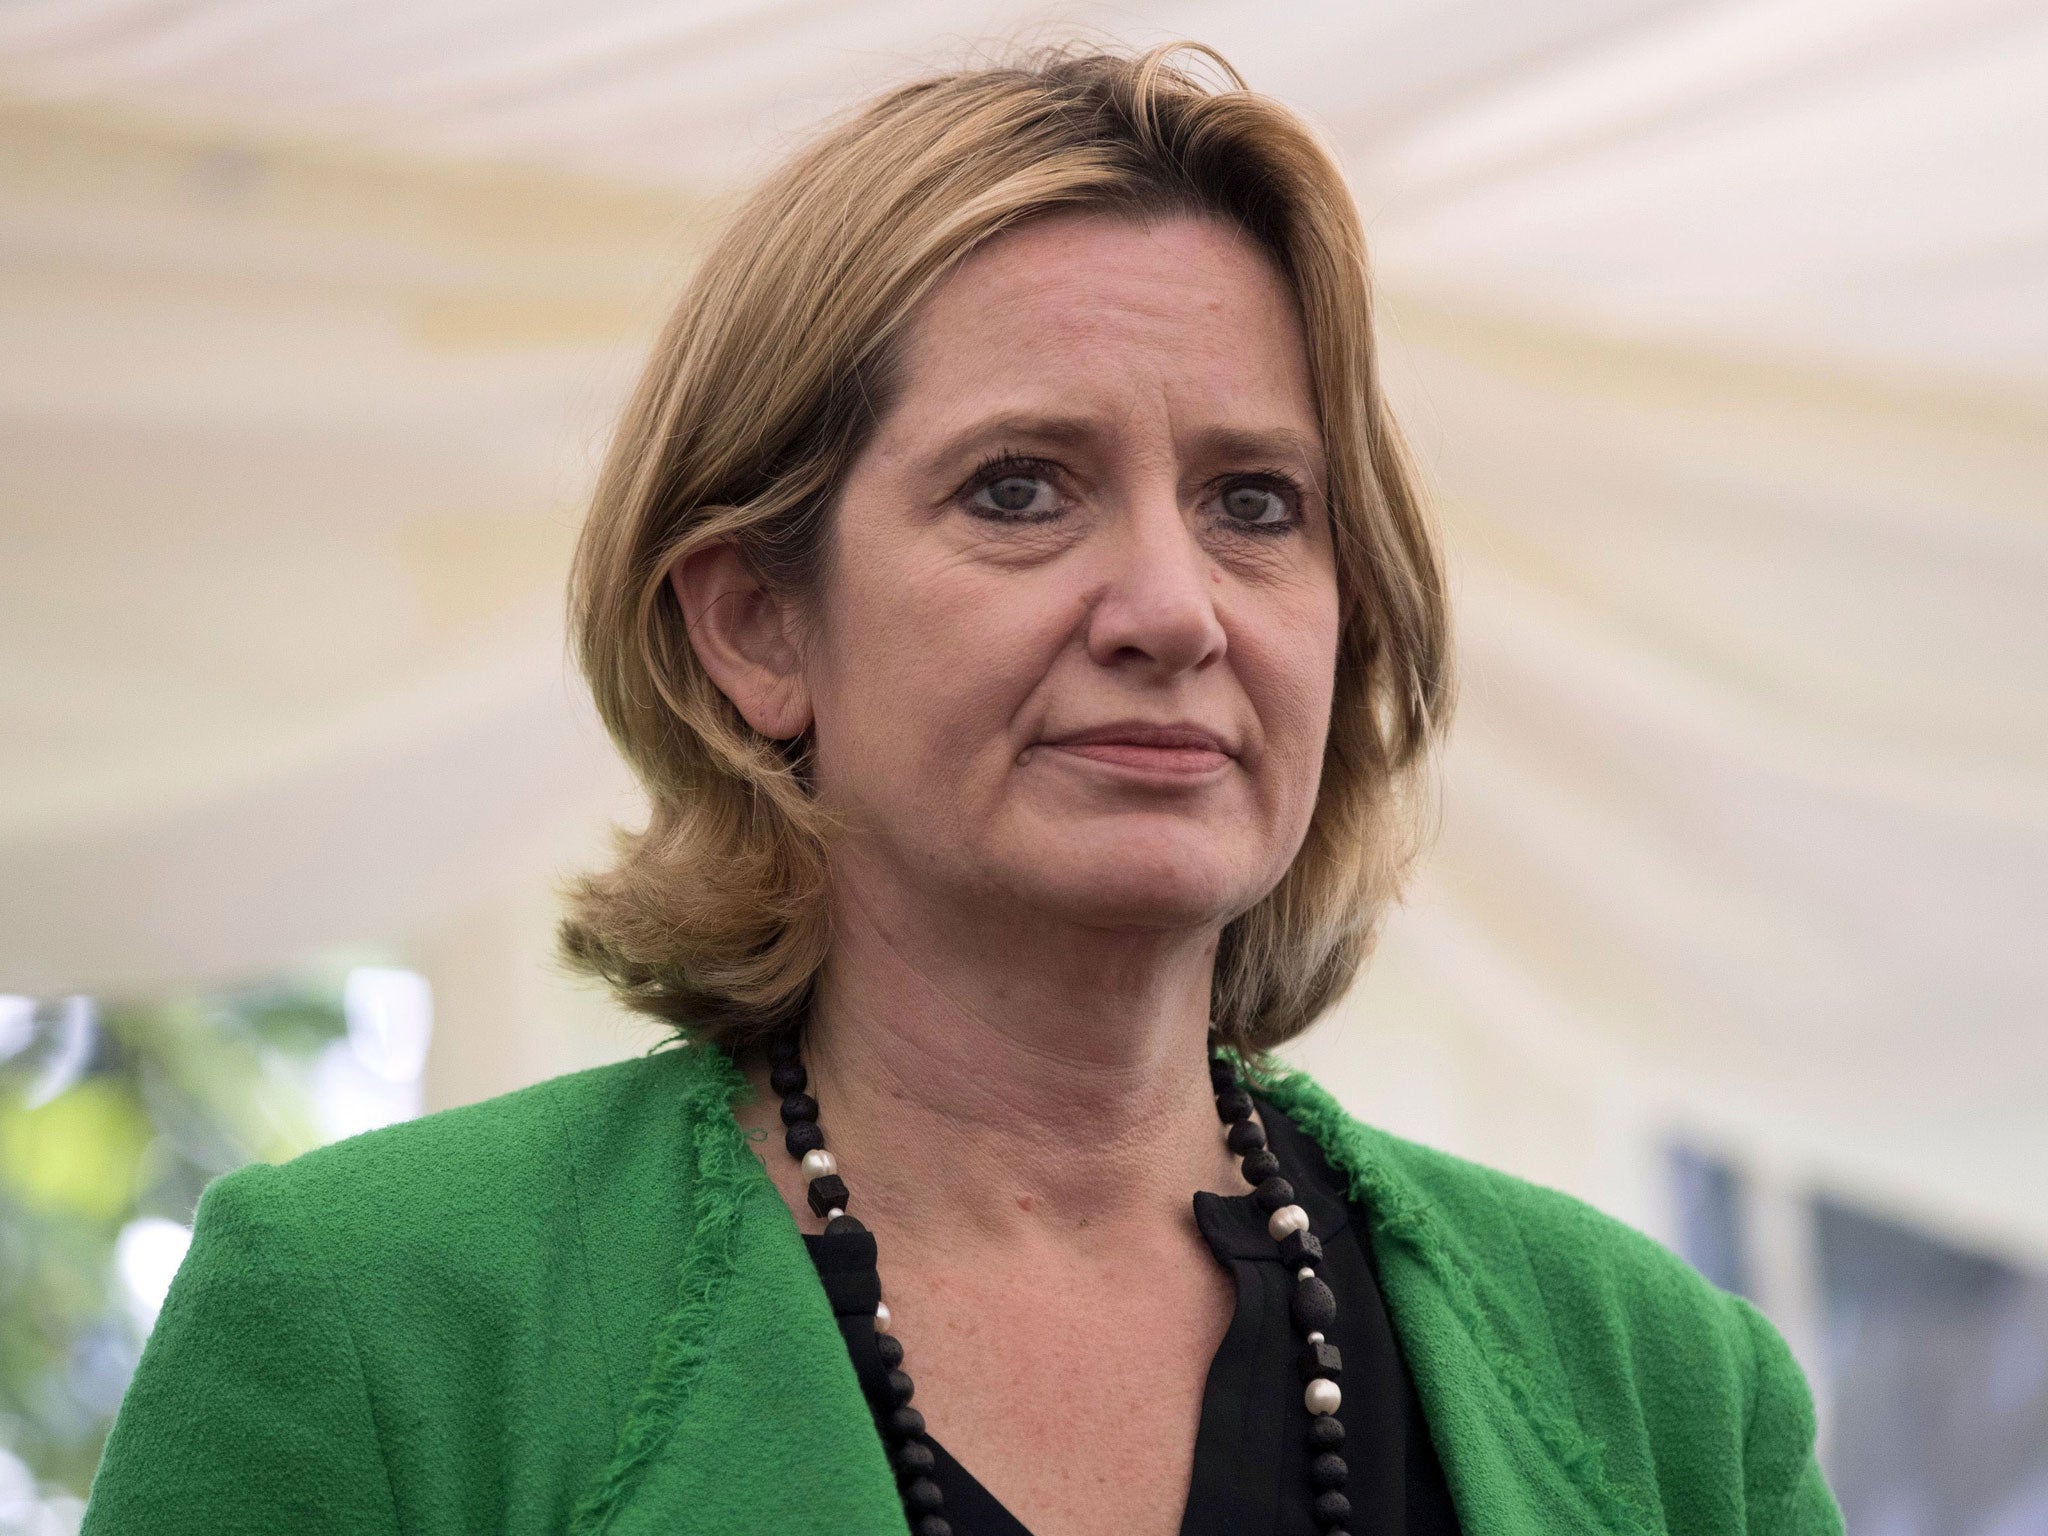 Amber Rudd is expected to be briefed on the plan by Migration Watch chairman Lord Green next week